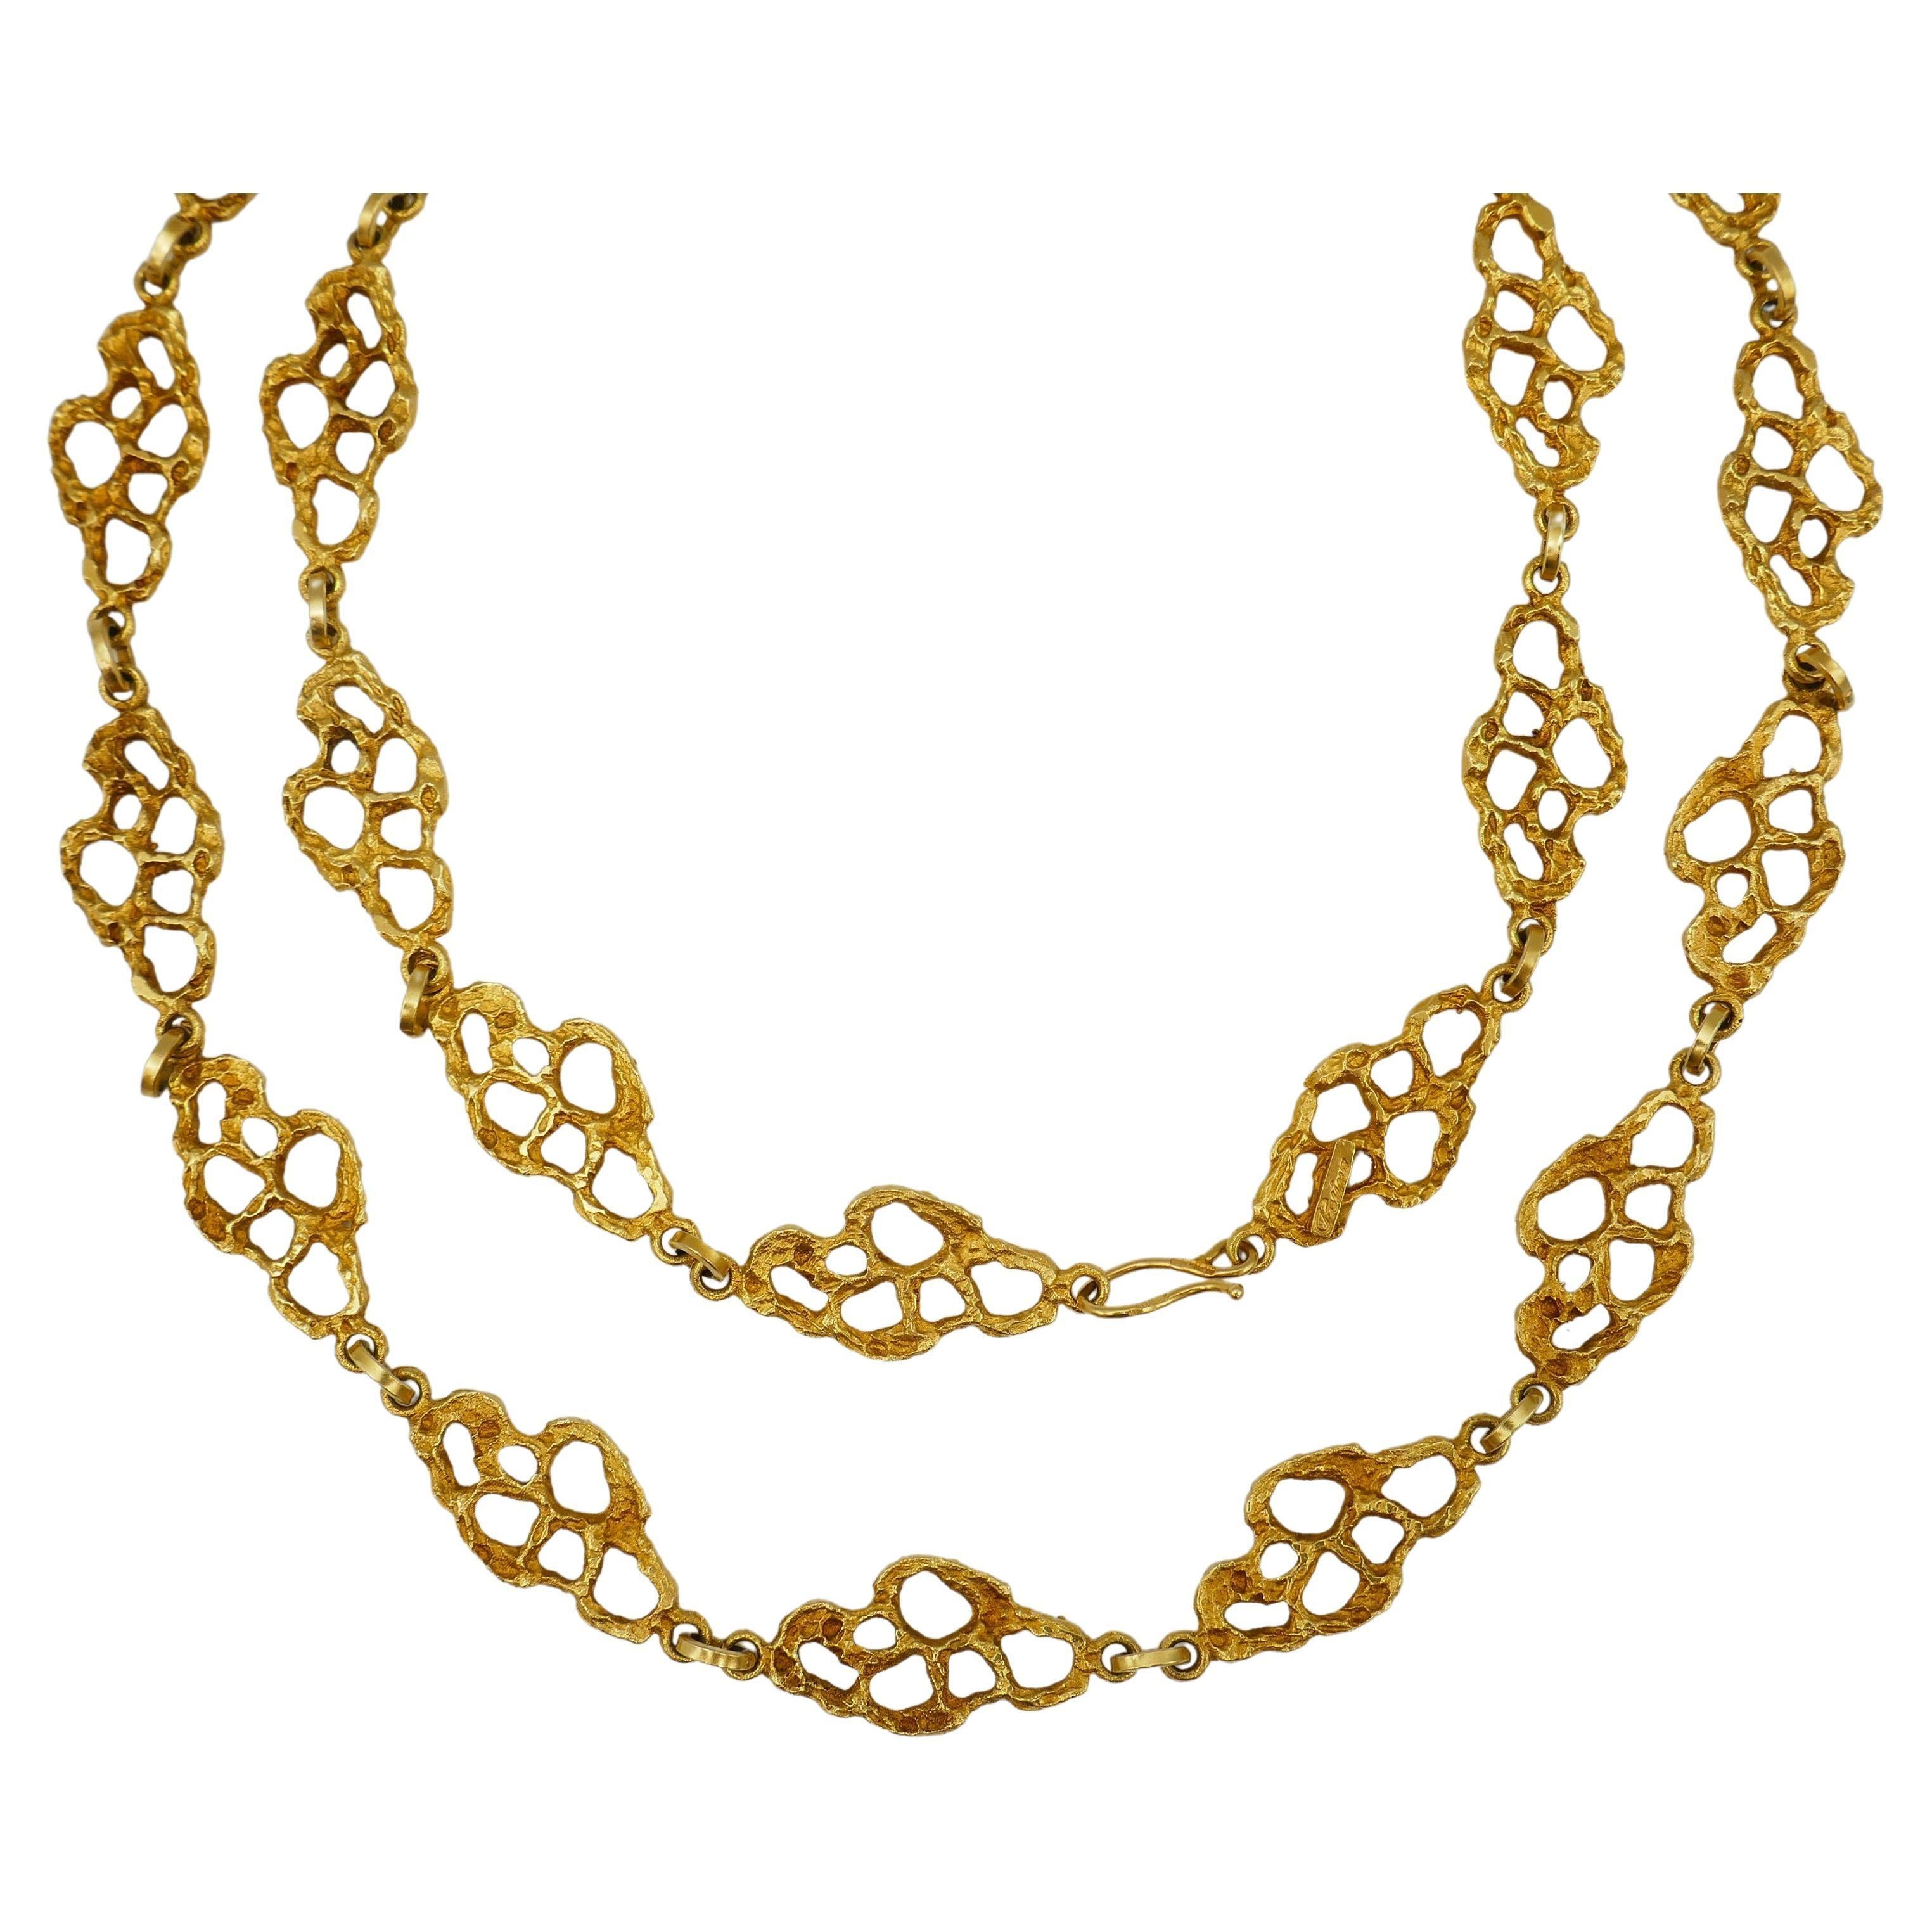 A gorgeous long vintage necklace made of 18k gold. 
Comprised of free form hammered gold elements connected by gold rings. 
Equipped with a hook closure.
Stamped with maker's mark, a country of origin (Italy) and a hallmark for 18k gold.

Vintage